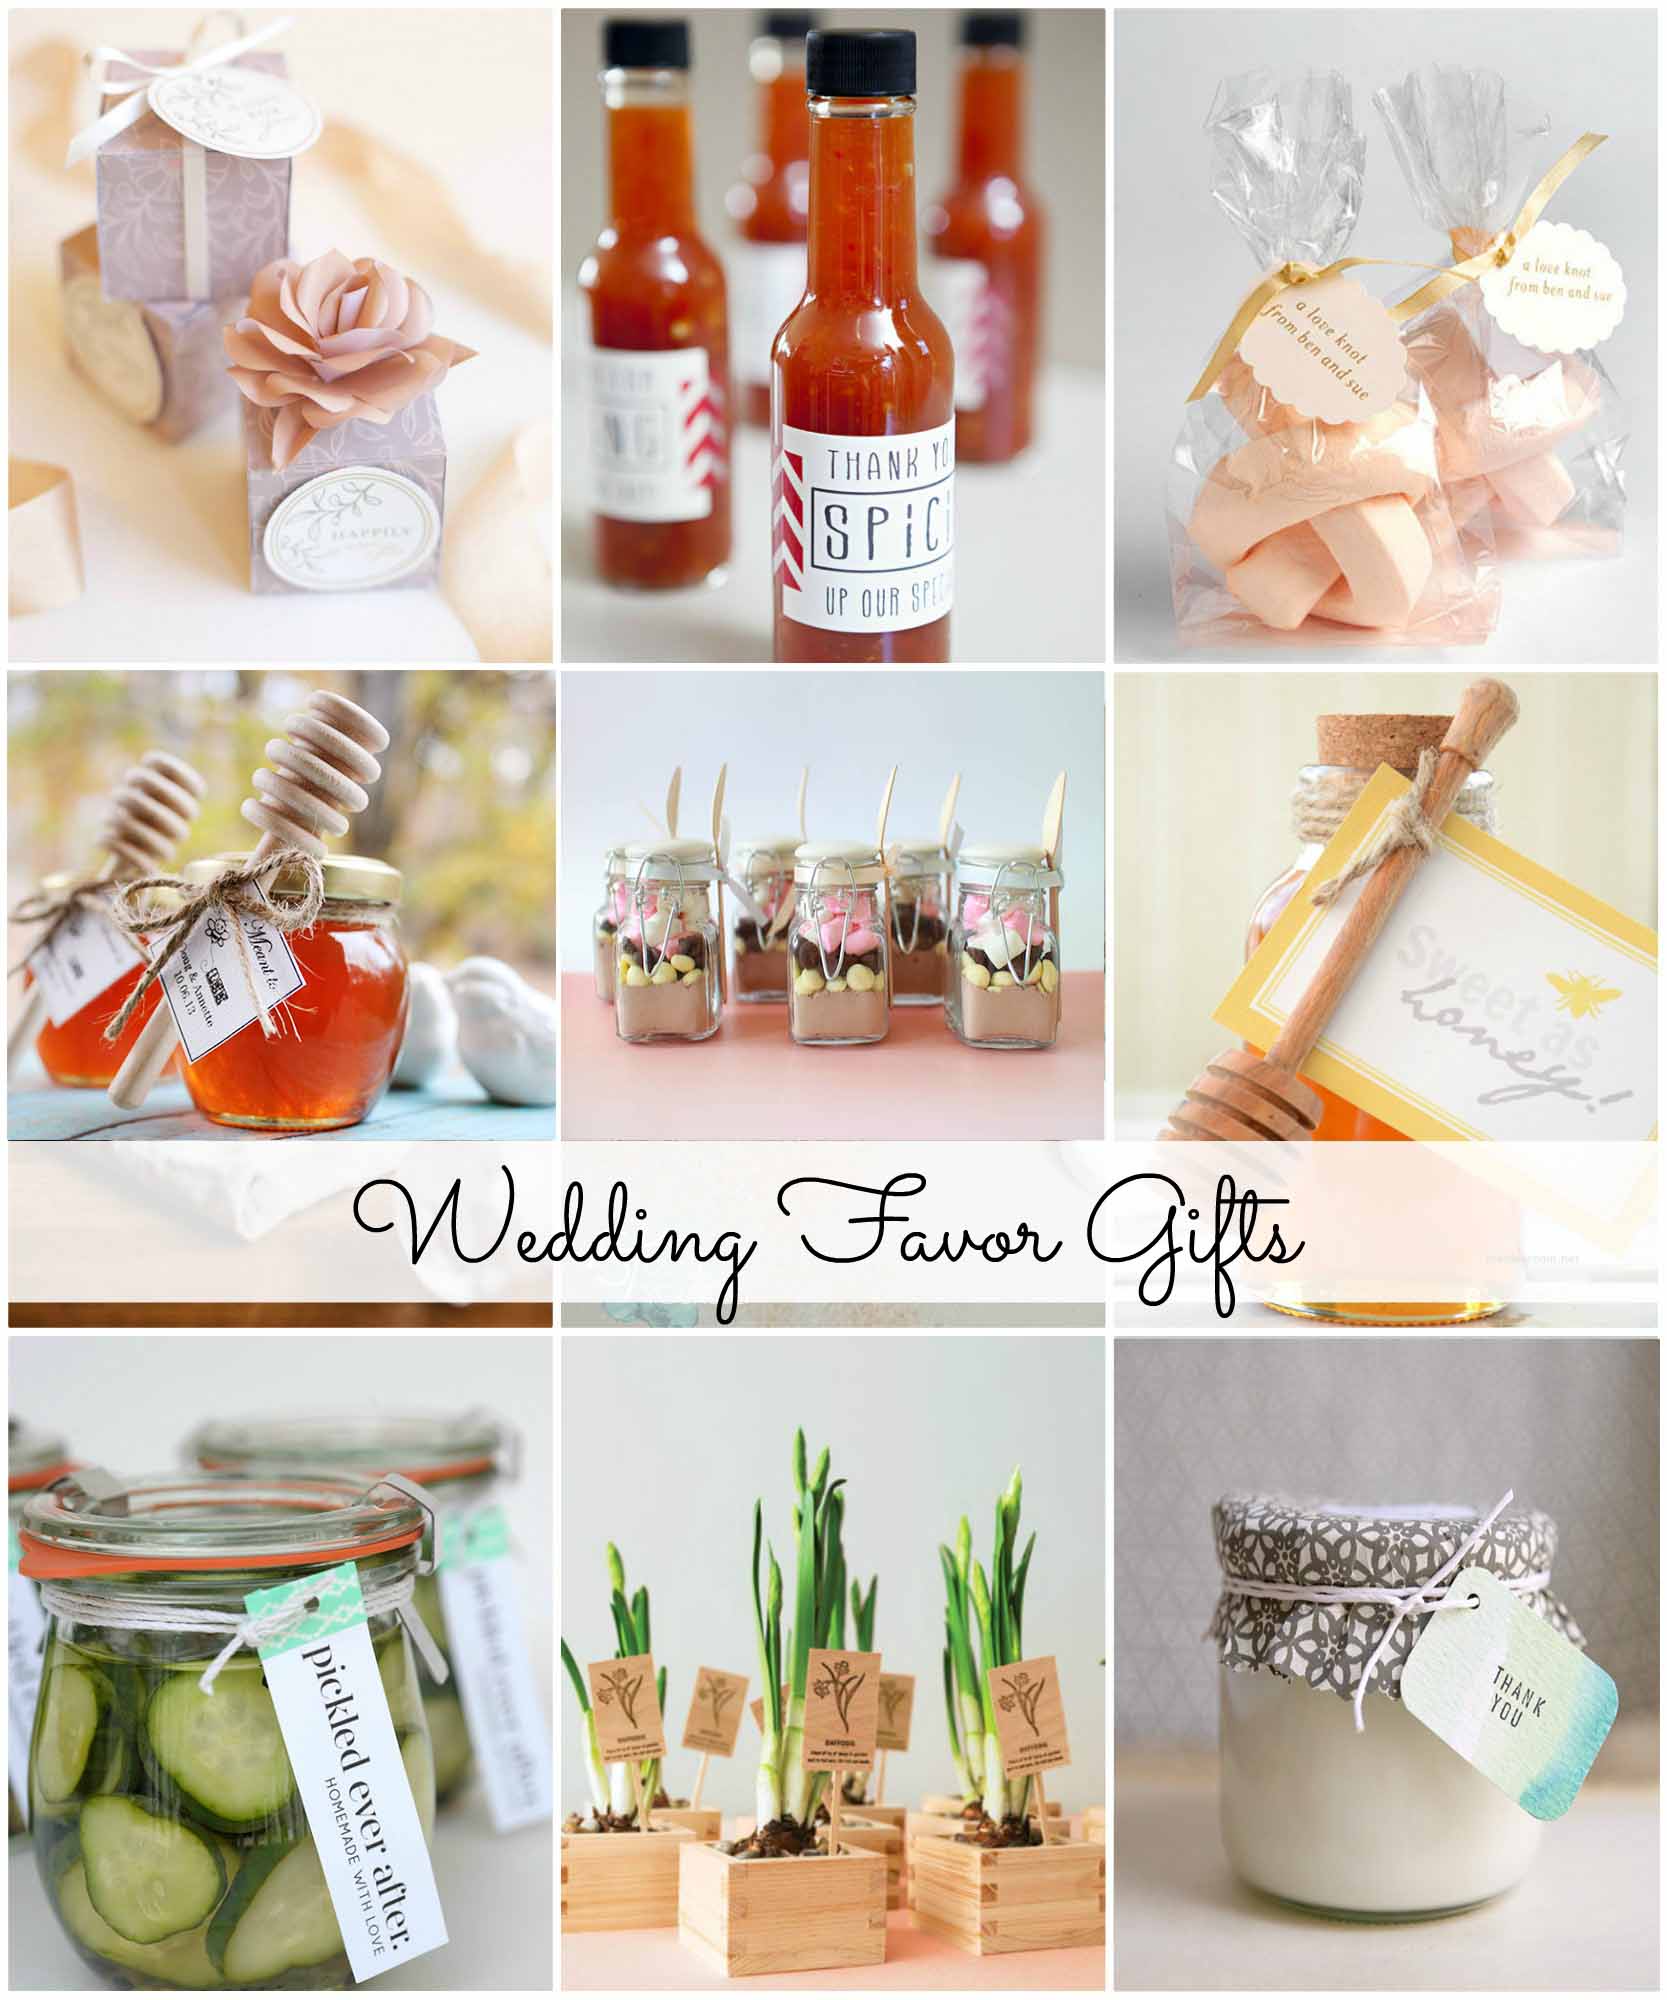 Wedding favors are small gifts for your guests